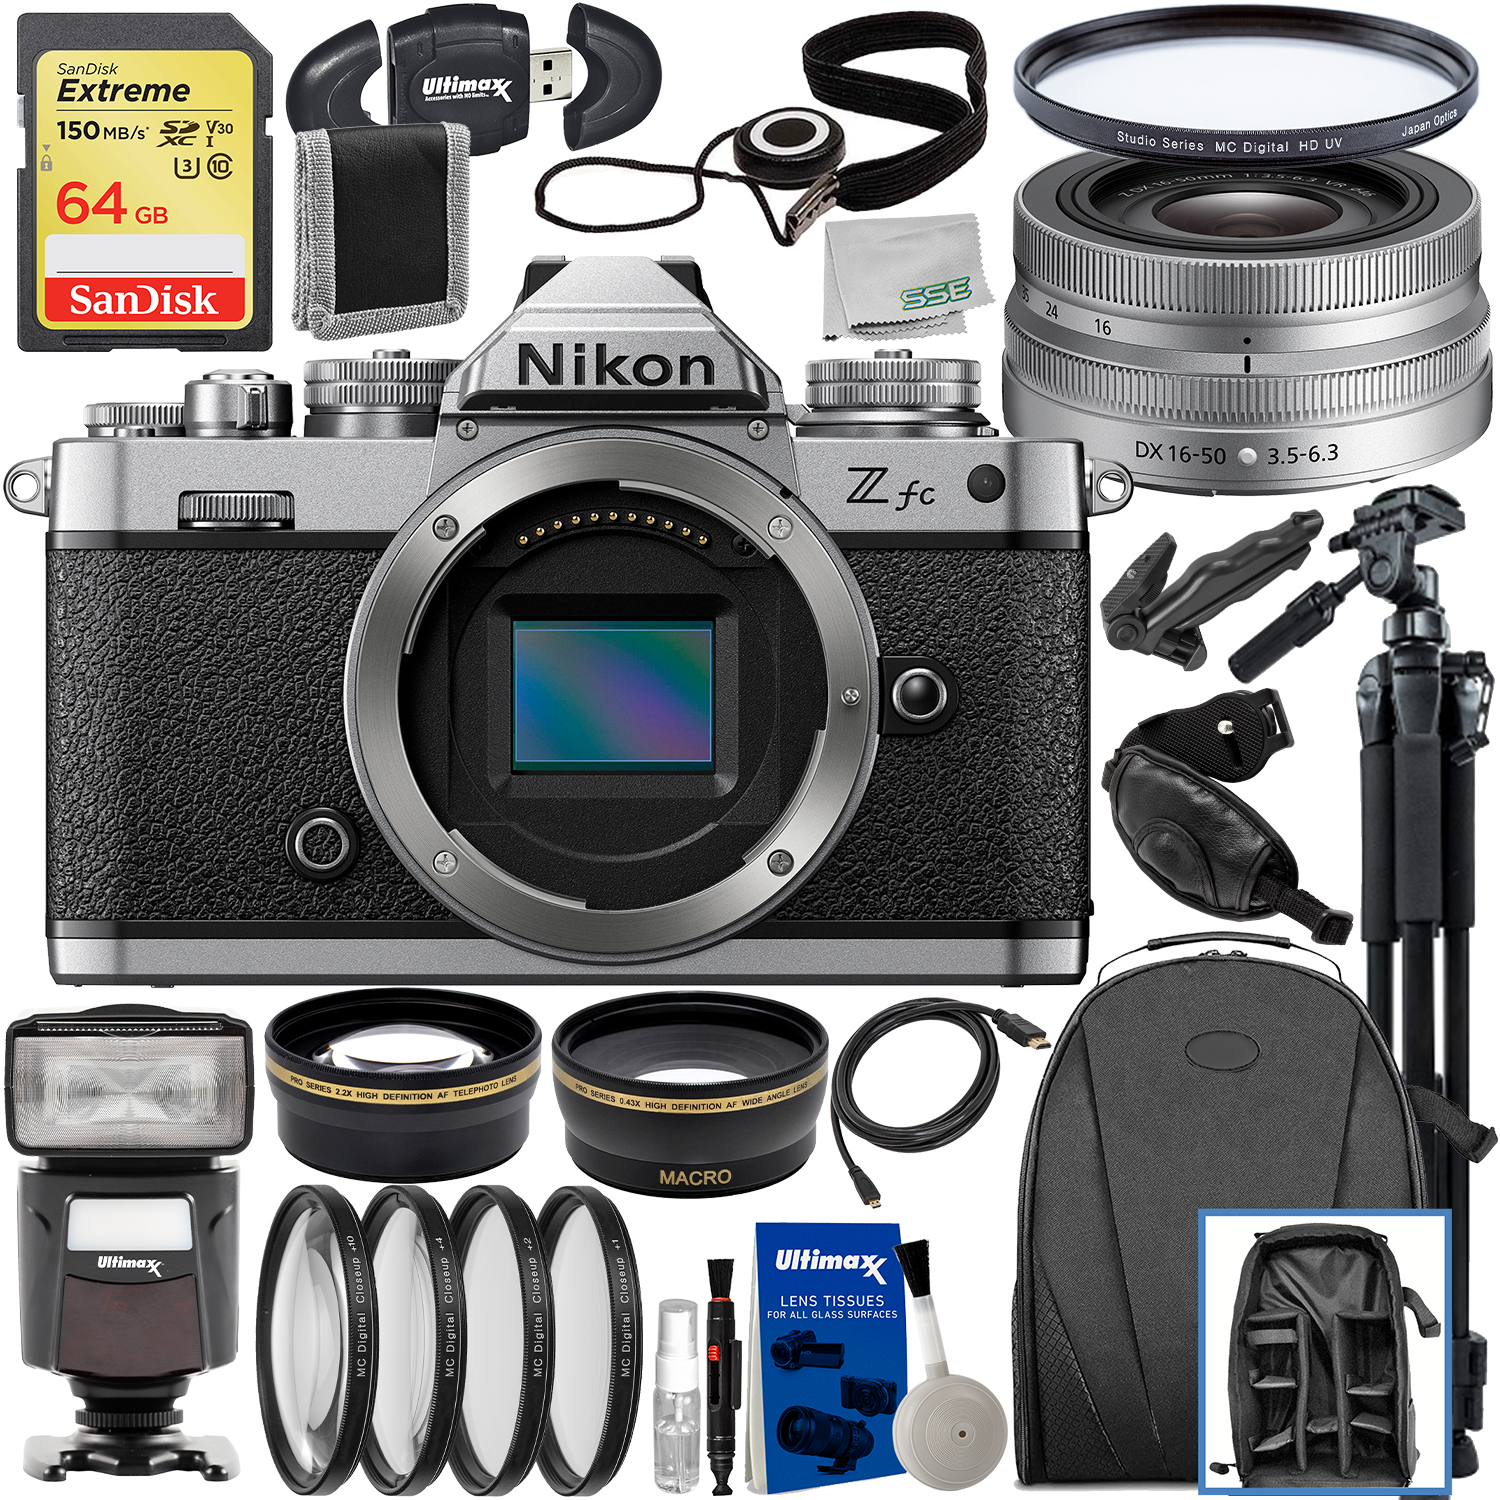 Nikon Zfc Mirrorless Camera with 16-50mm Lens and Advanced Accessory Bundle: SanDisk 64GB Extreme SDXC, Universal Speedlite with LED Video Light & Much More (29pc Bundle) - image 1 of 10